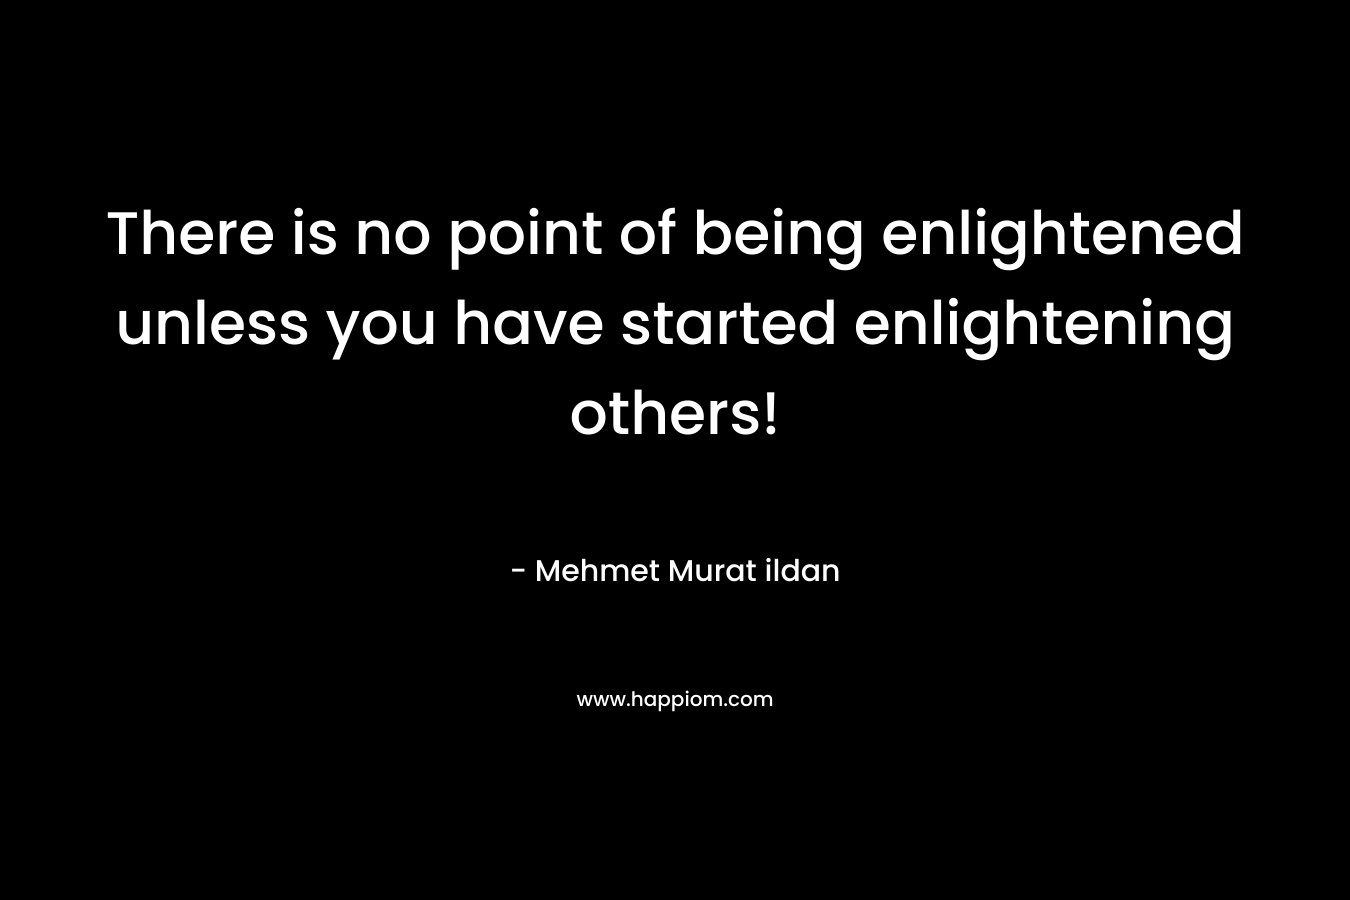 There is no point of being enlightened unless you have started enlightening others! – Mehmet Murat ildan